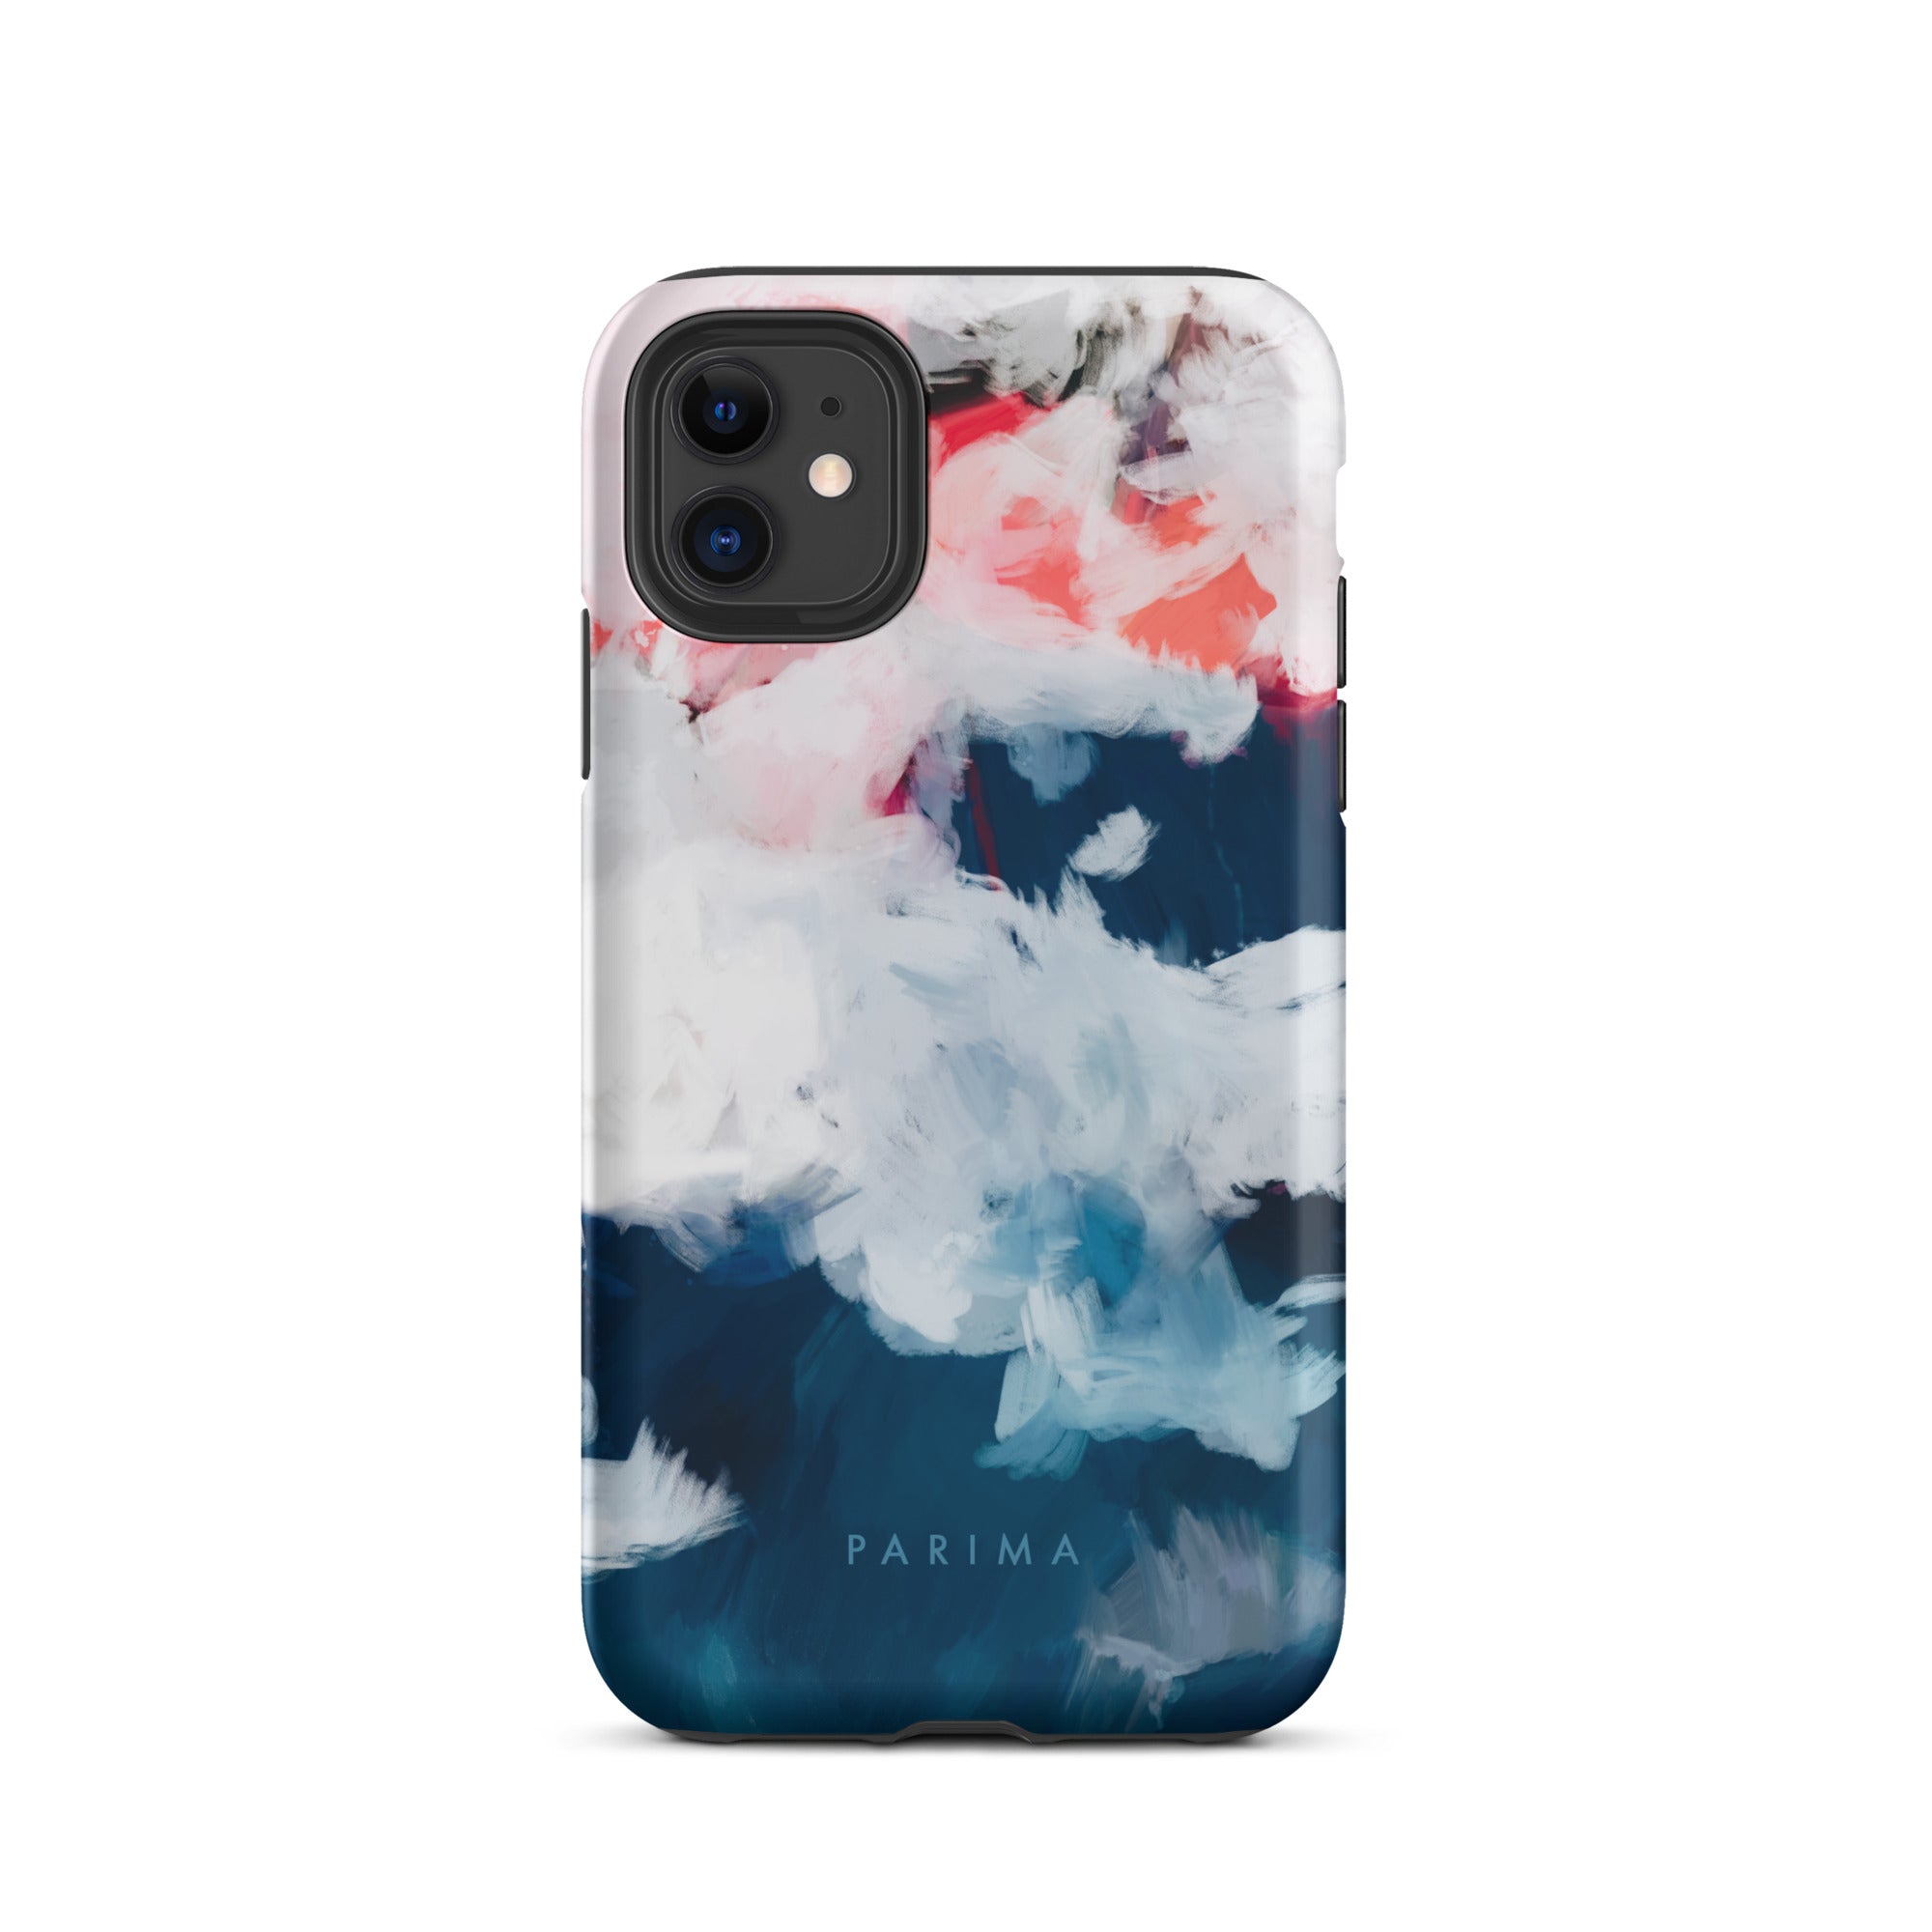 Oceane, blue and pink abstract art on iPhone 11 tough case by Parima Studio